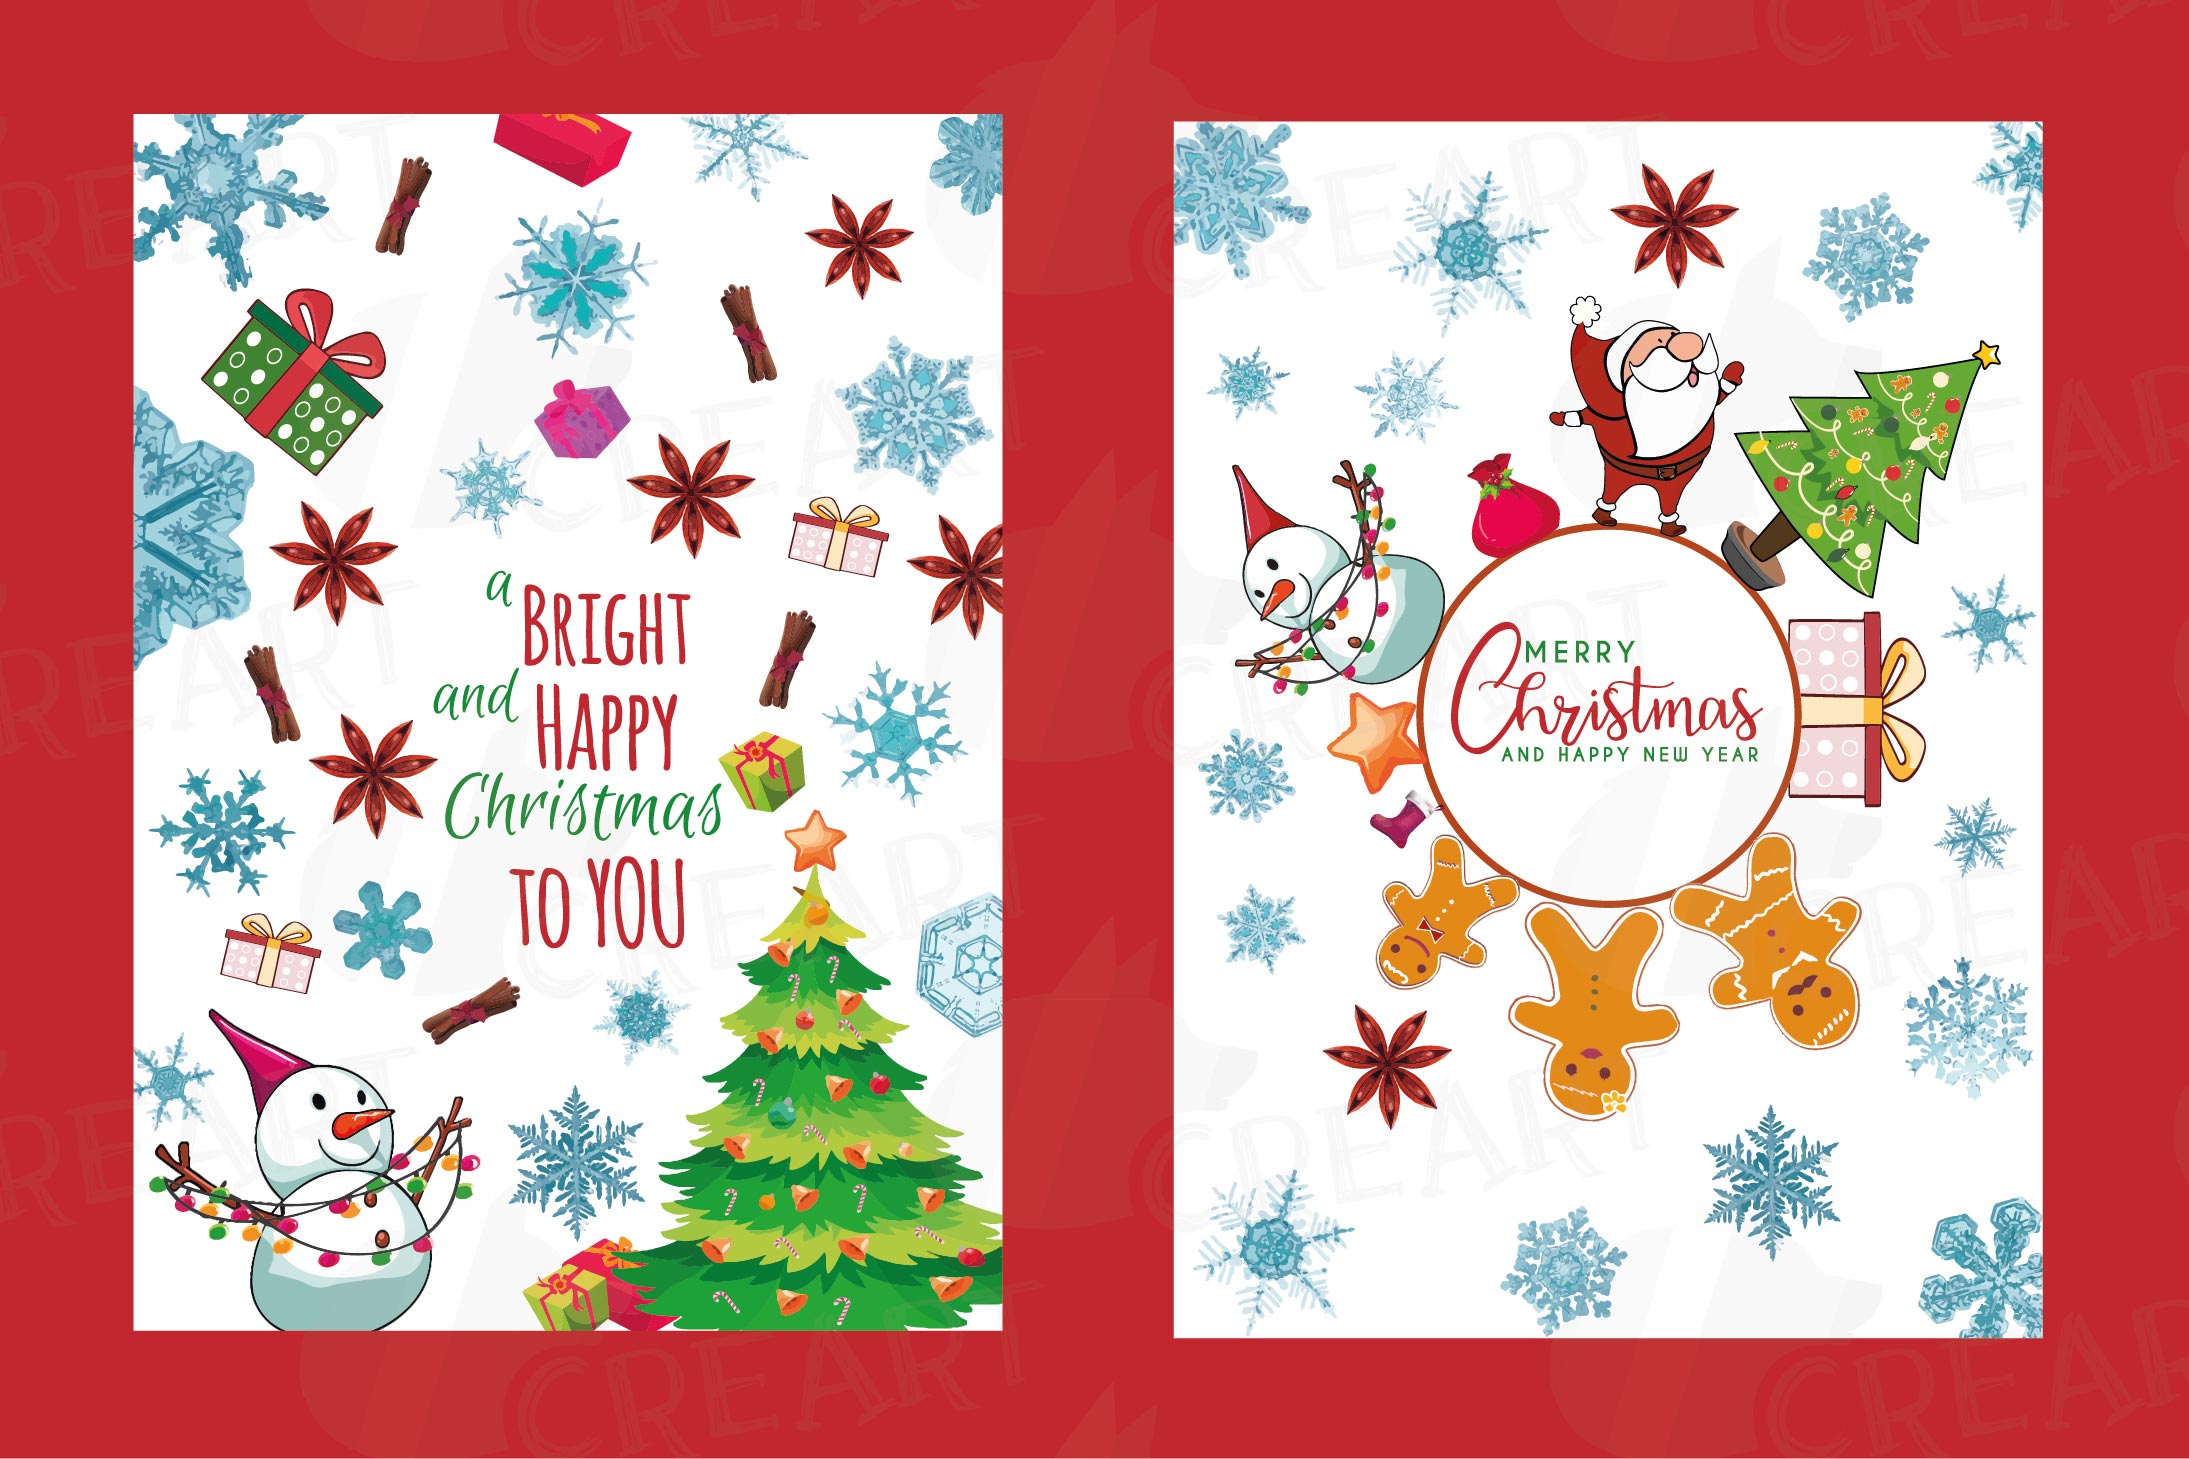 75 Christmas Greetings + What To Write In A Christmas Card